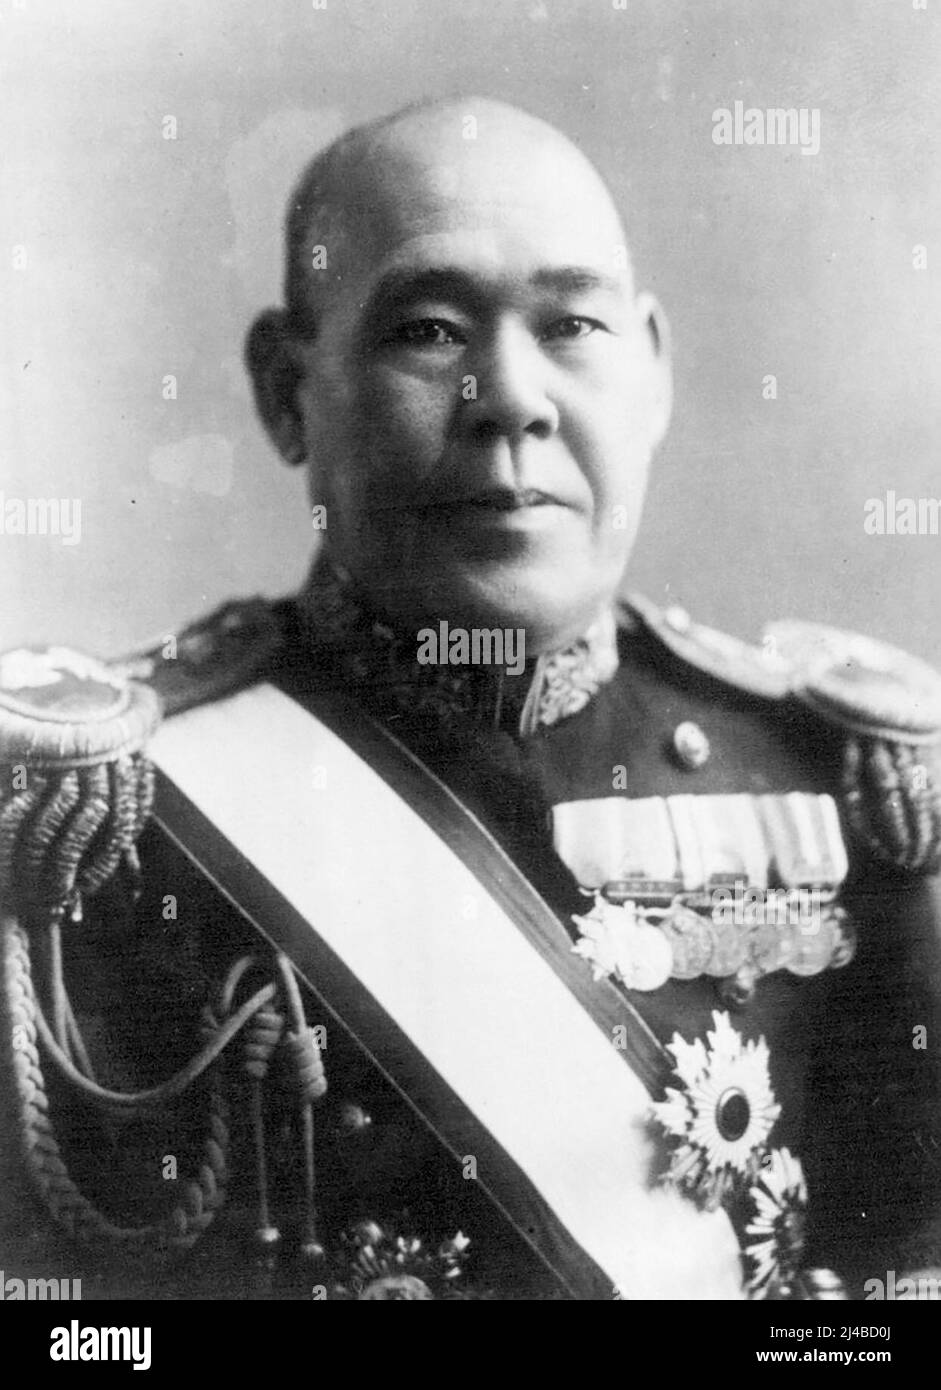 Admiral Osami Nagano, Navy Minister in the Hirota Cabinet. October 19, 1936. (Photo by The Domei News Photos Service). Stock Photo